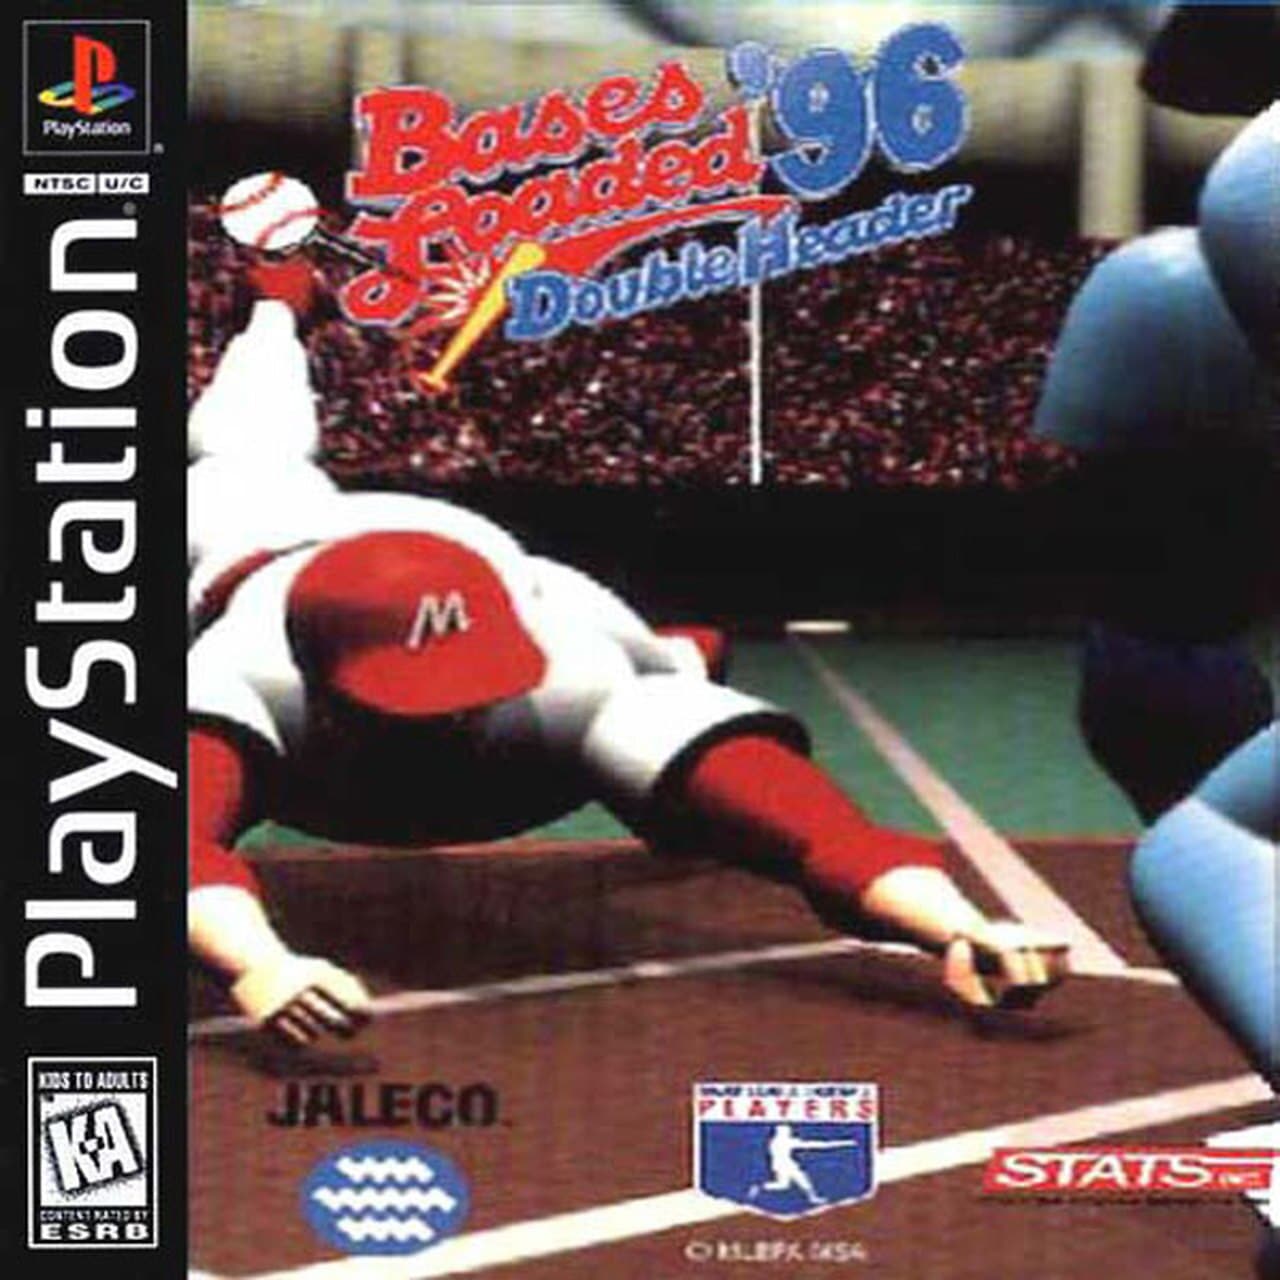 Bases Loaded ’96: Double Header player count stats